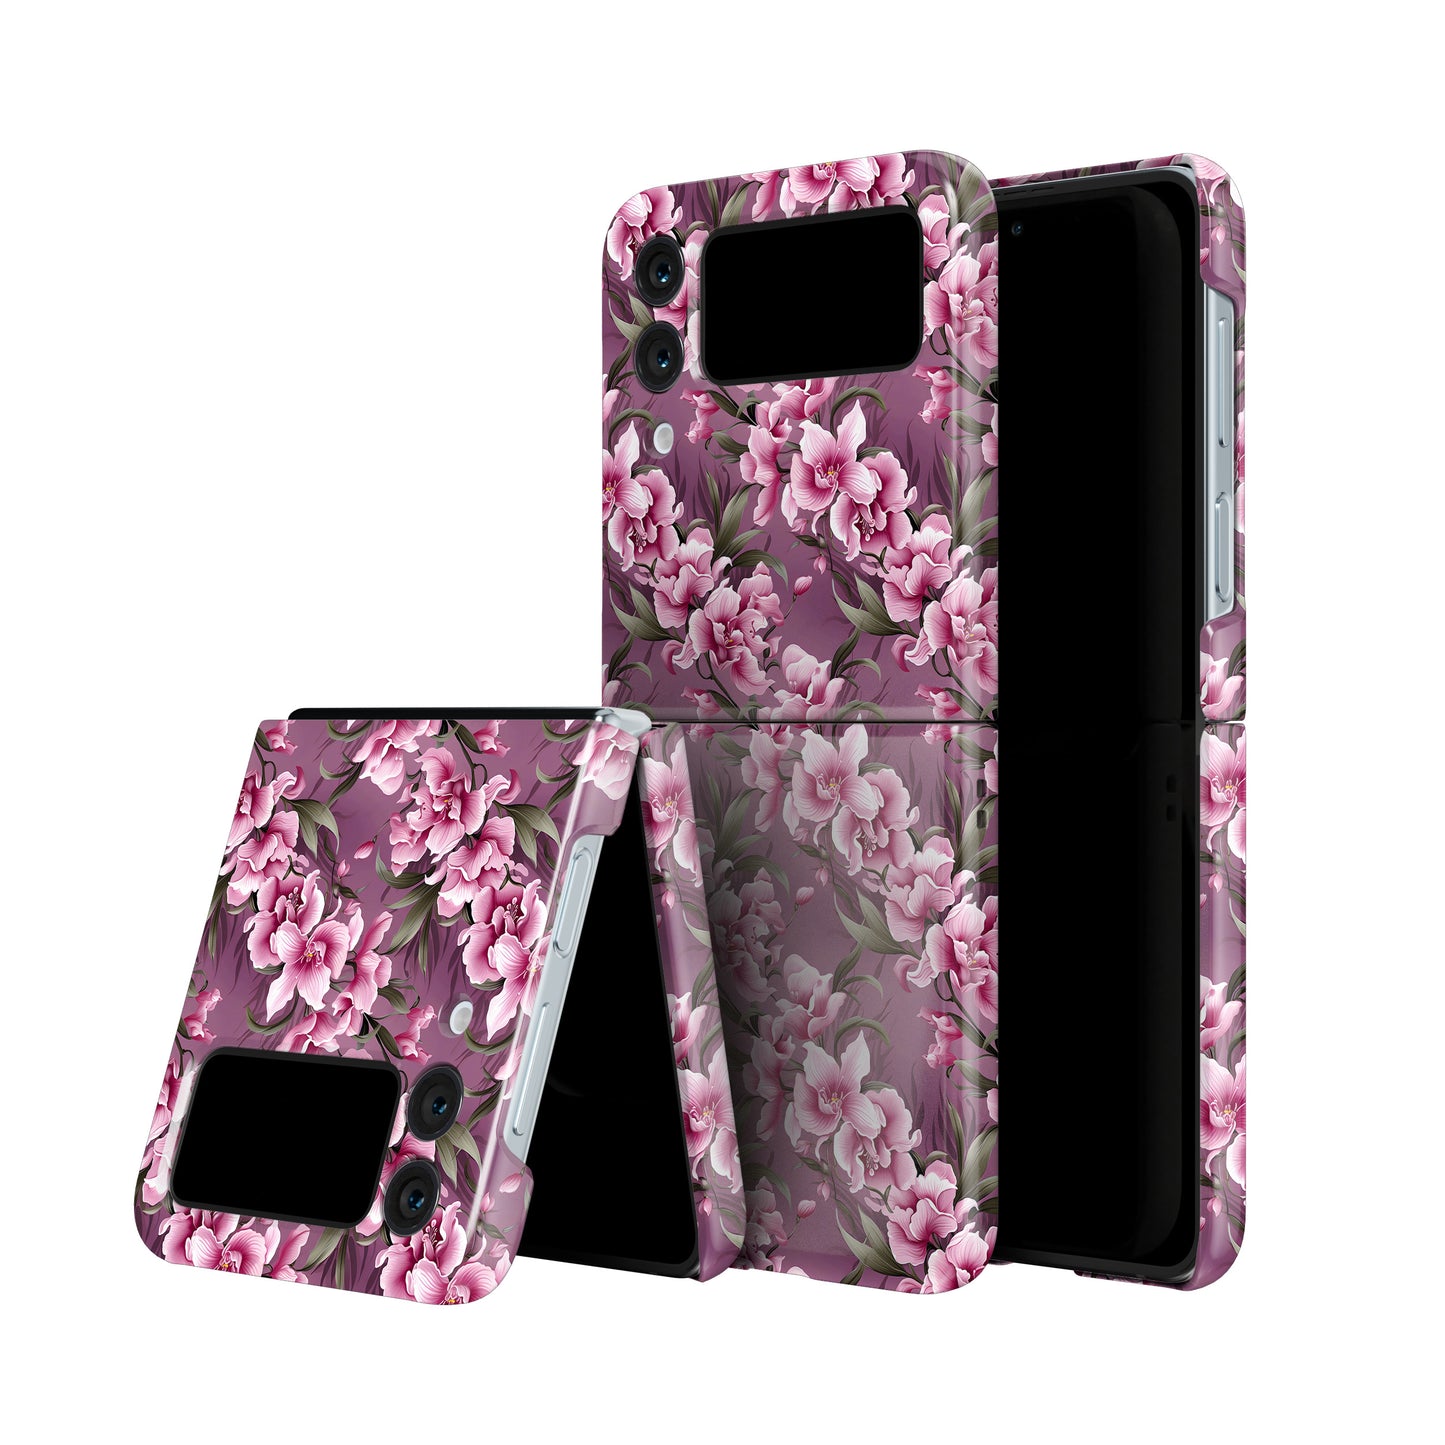 Floral Symphony Nature's Melody in Bloom - Samsung Galaxy Z Flip-Flower Phone Case-Tousphone-Tough Case-Galaxy Z Flip 5-Tousphone